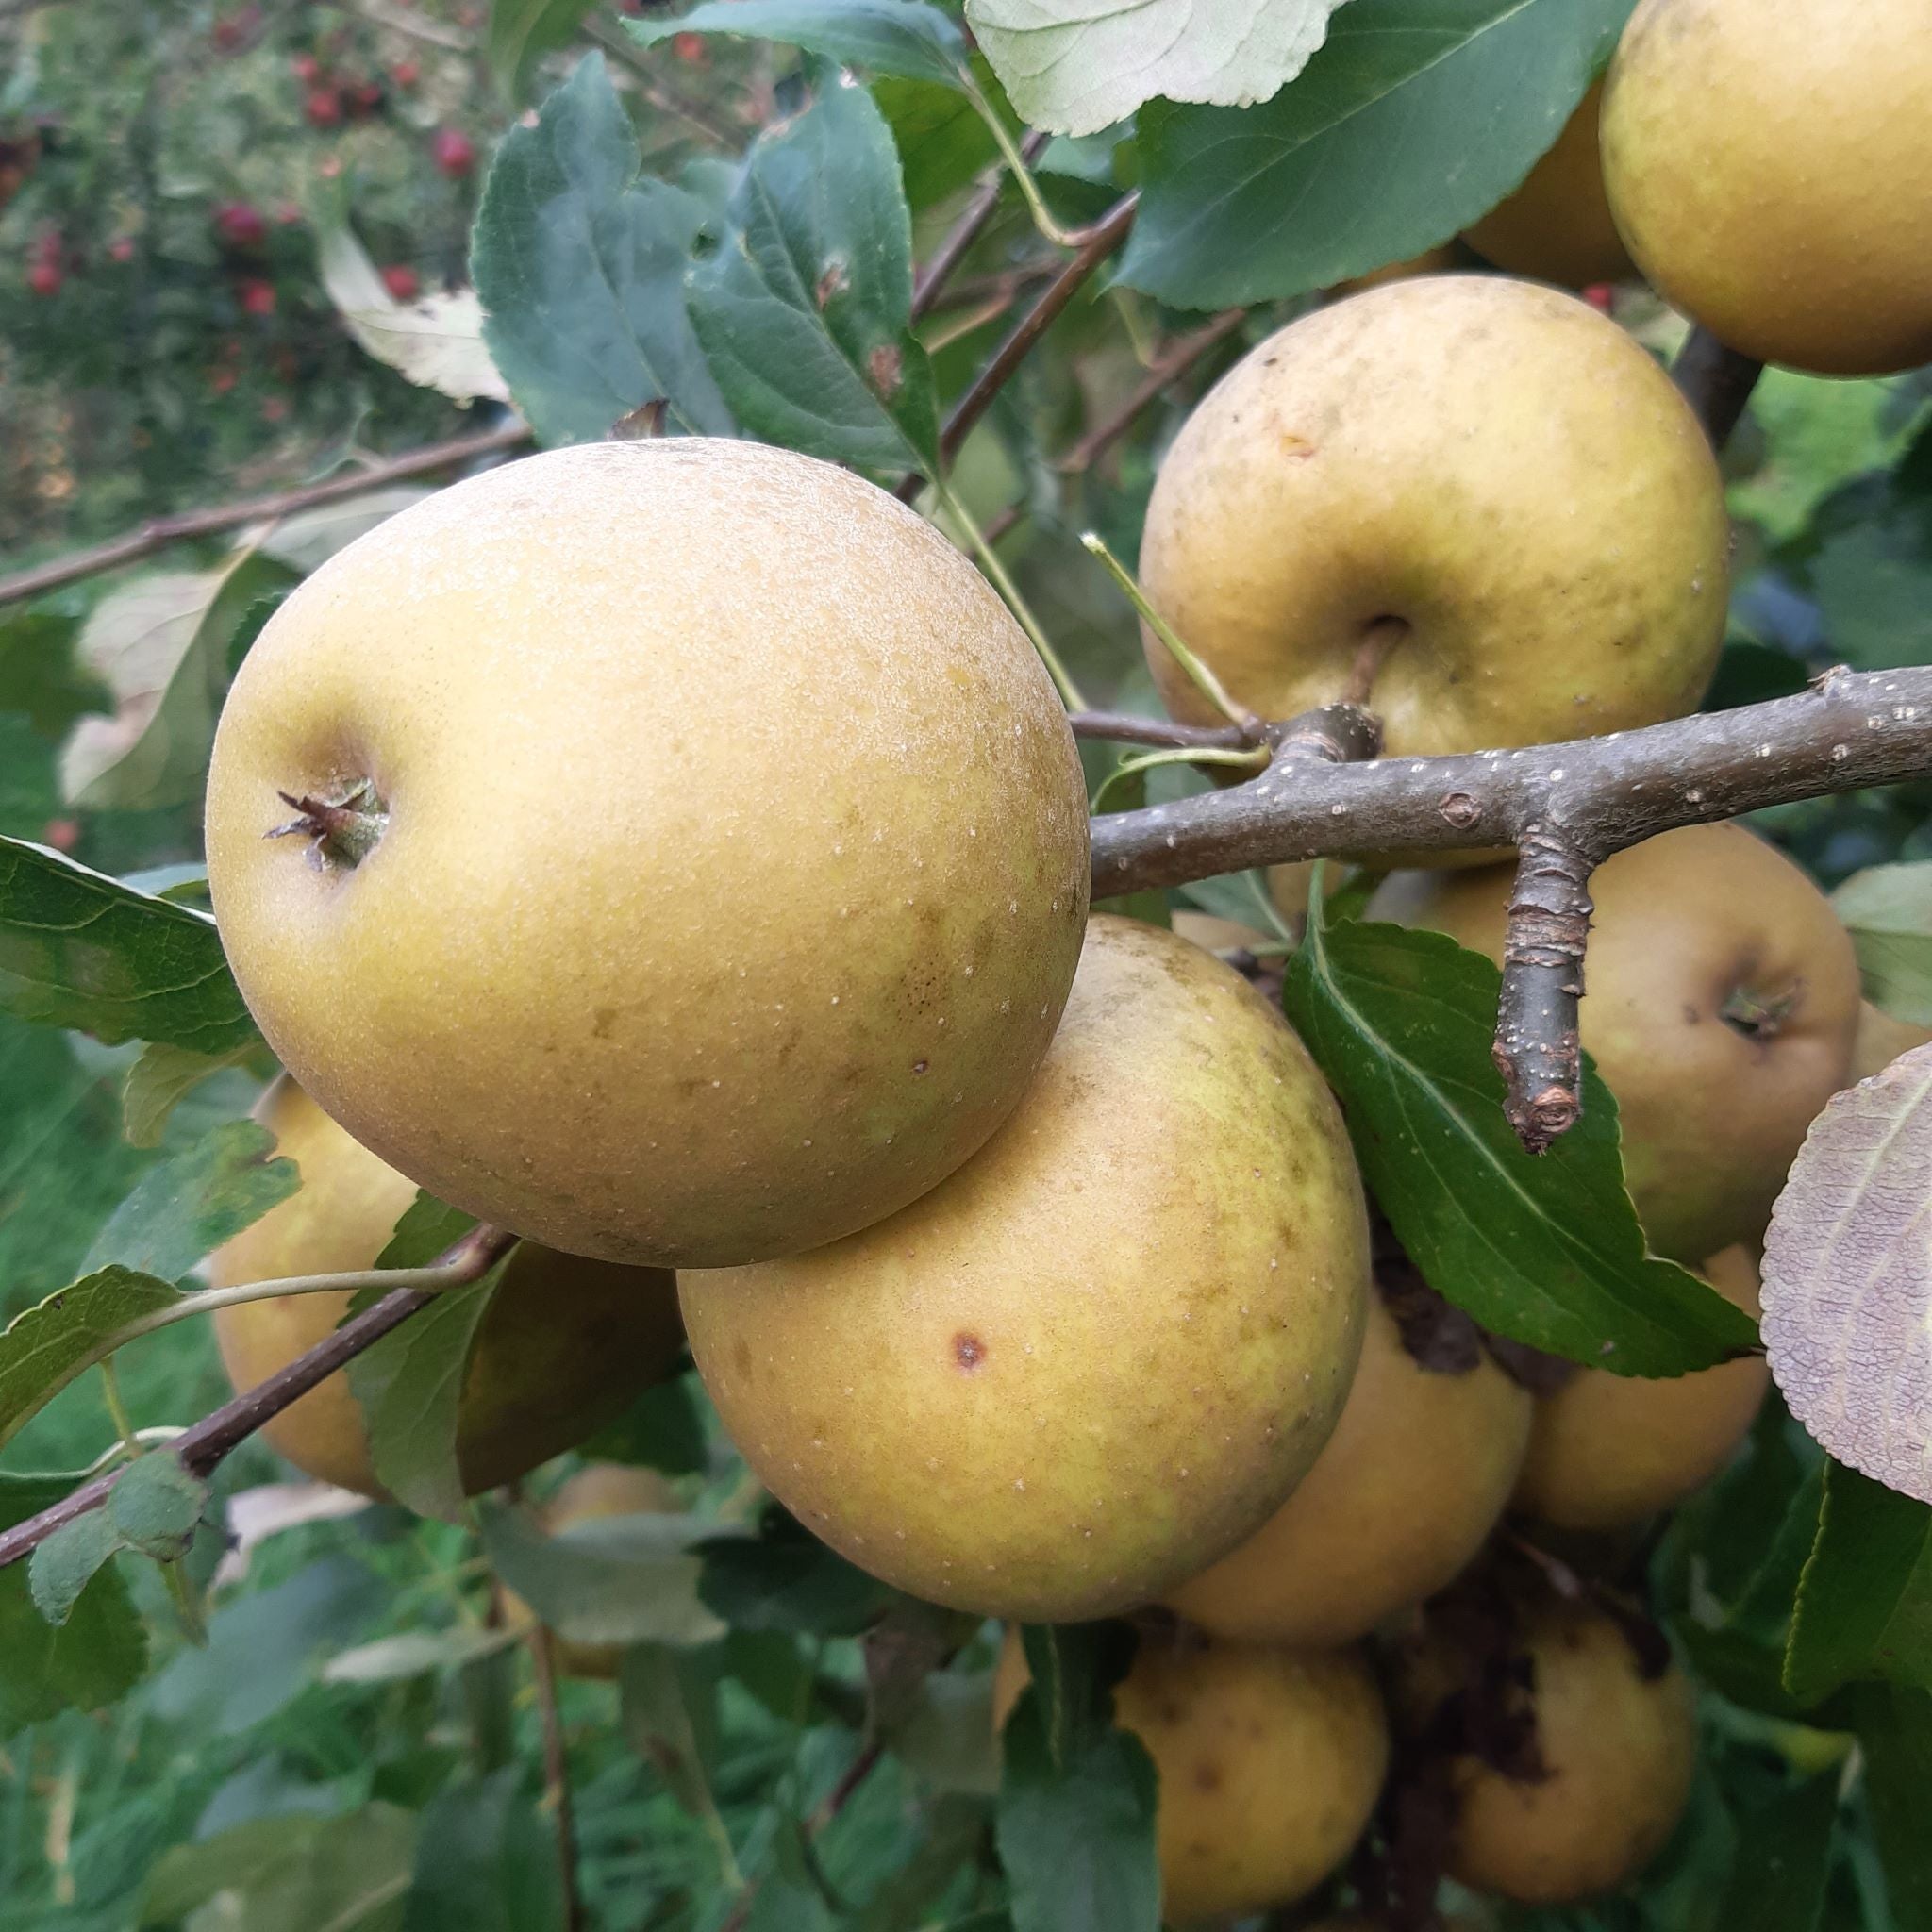 Herefordshire Russet apple tree